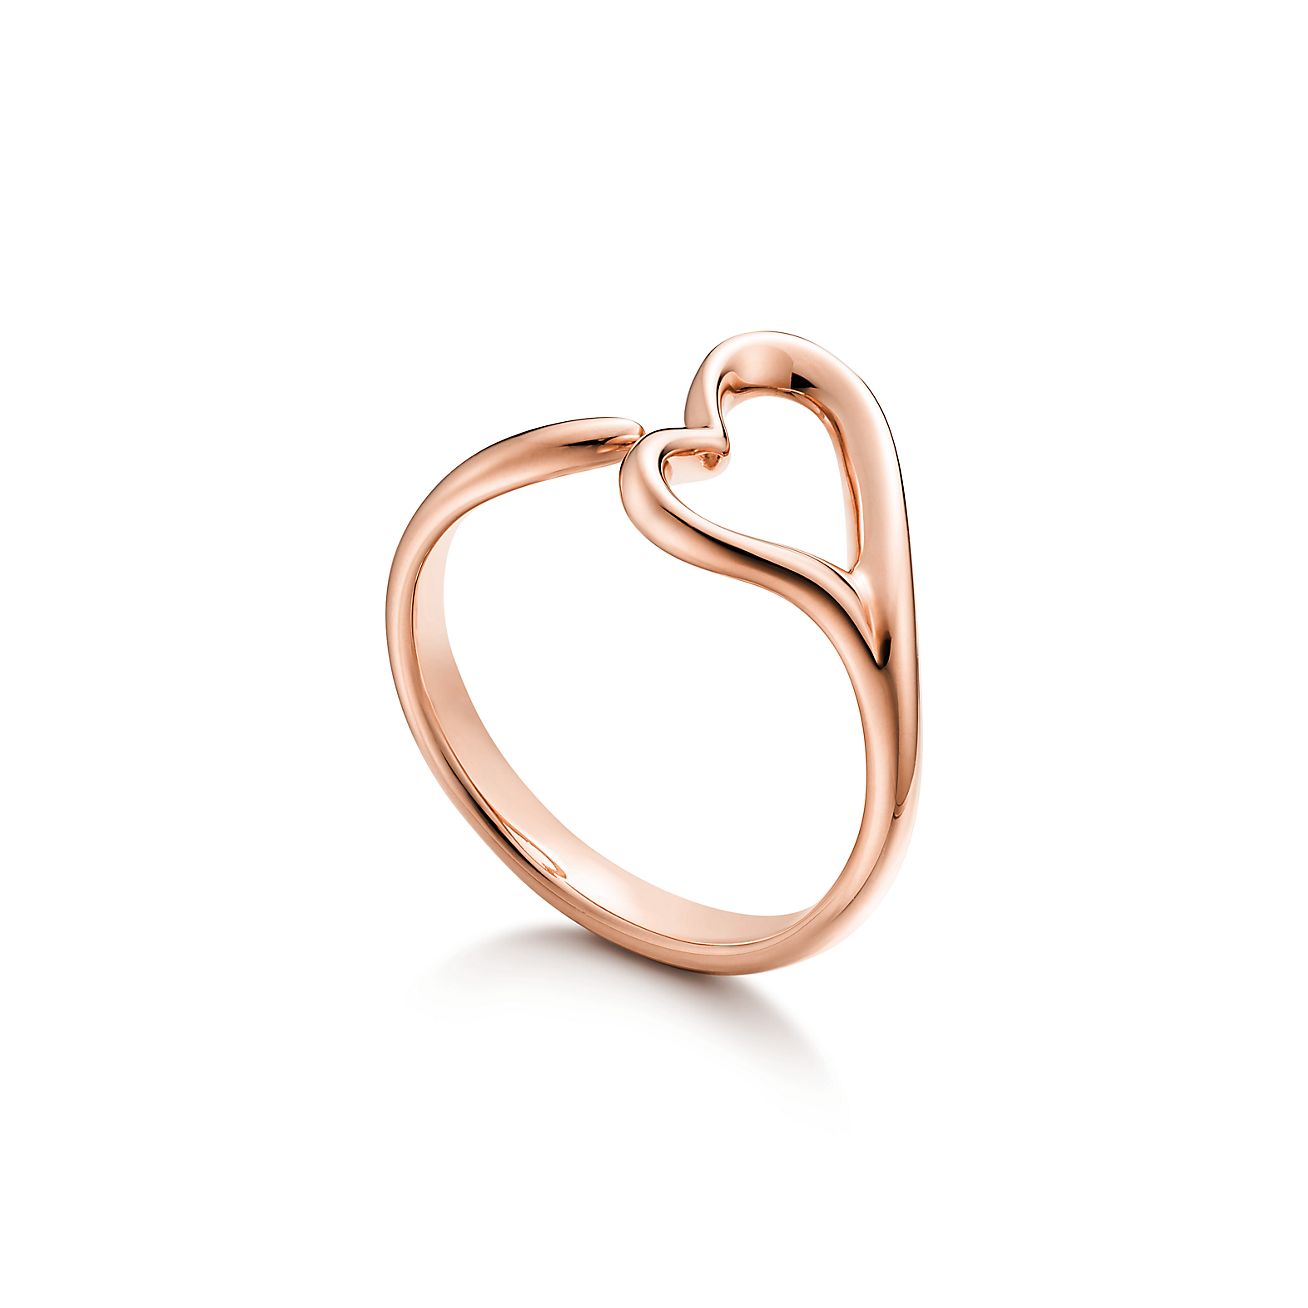 Wholesaler of Delicate 22kt gold heart ring | Jewelxy - 223929